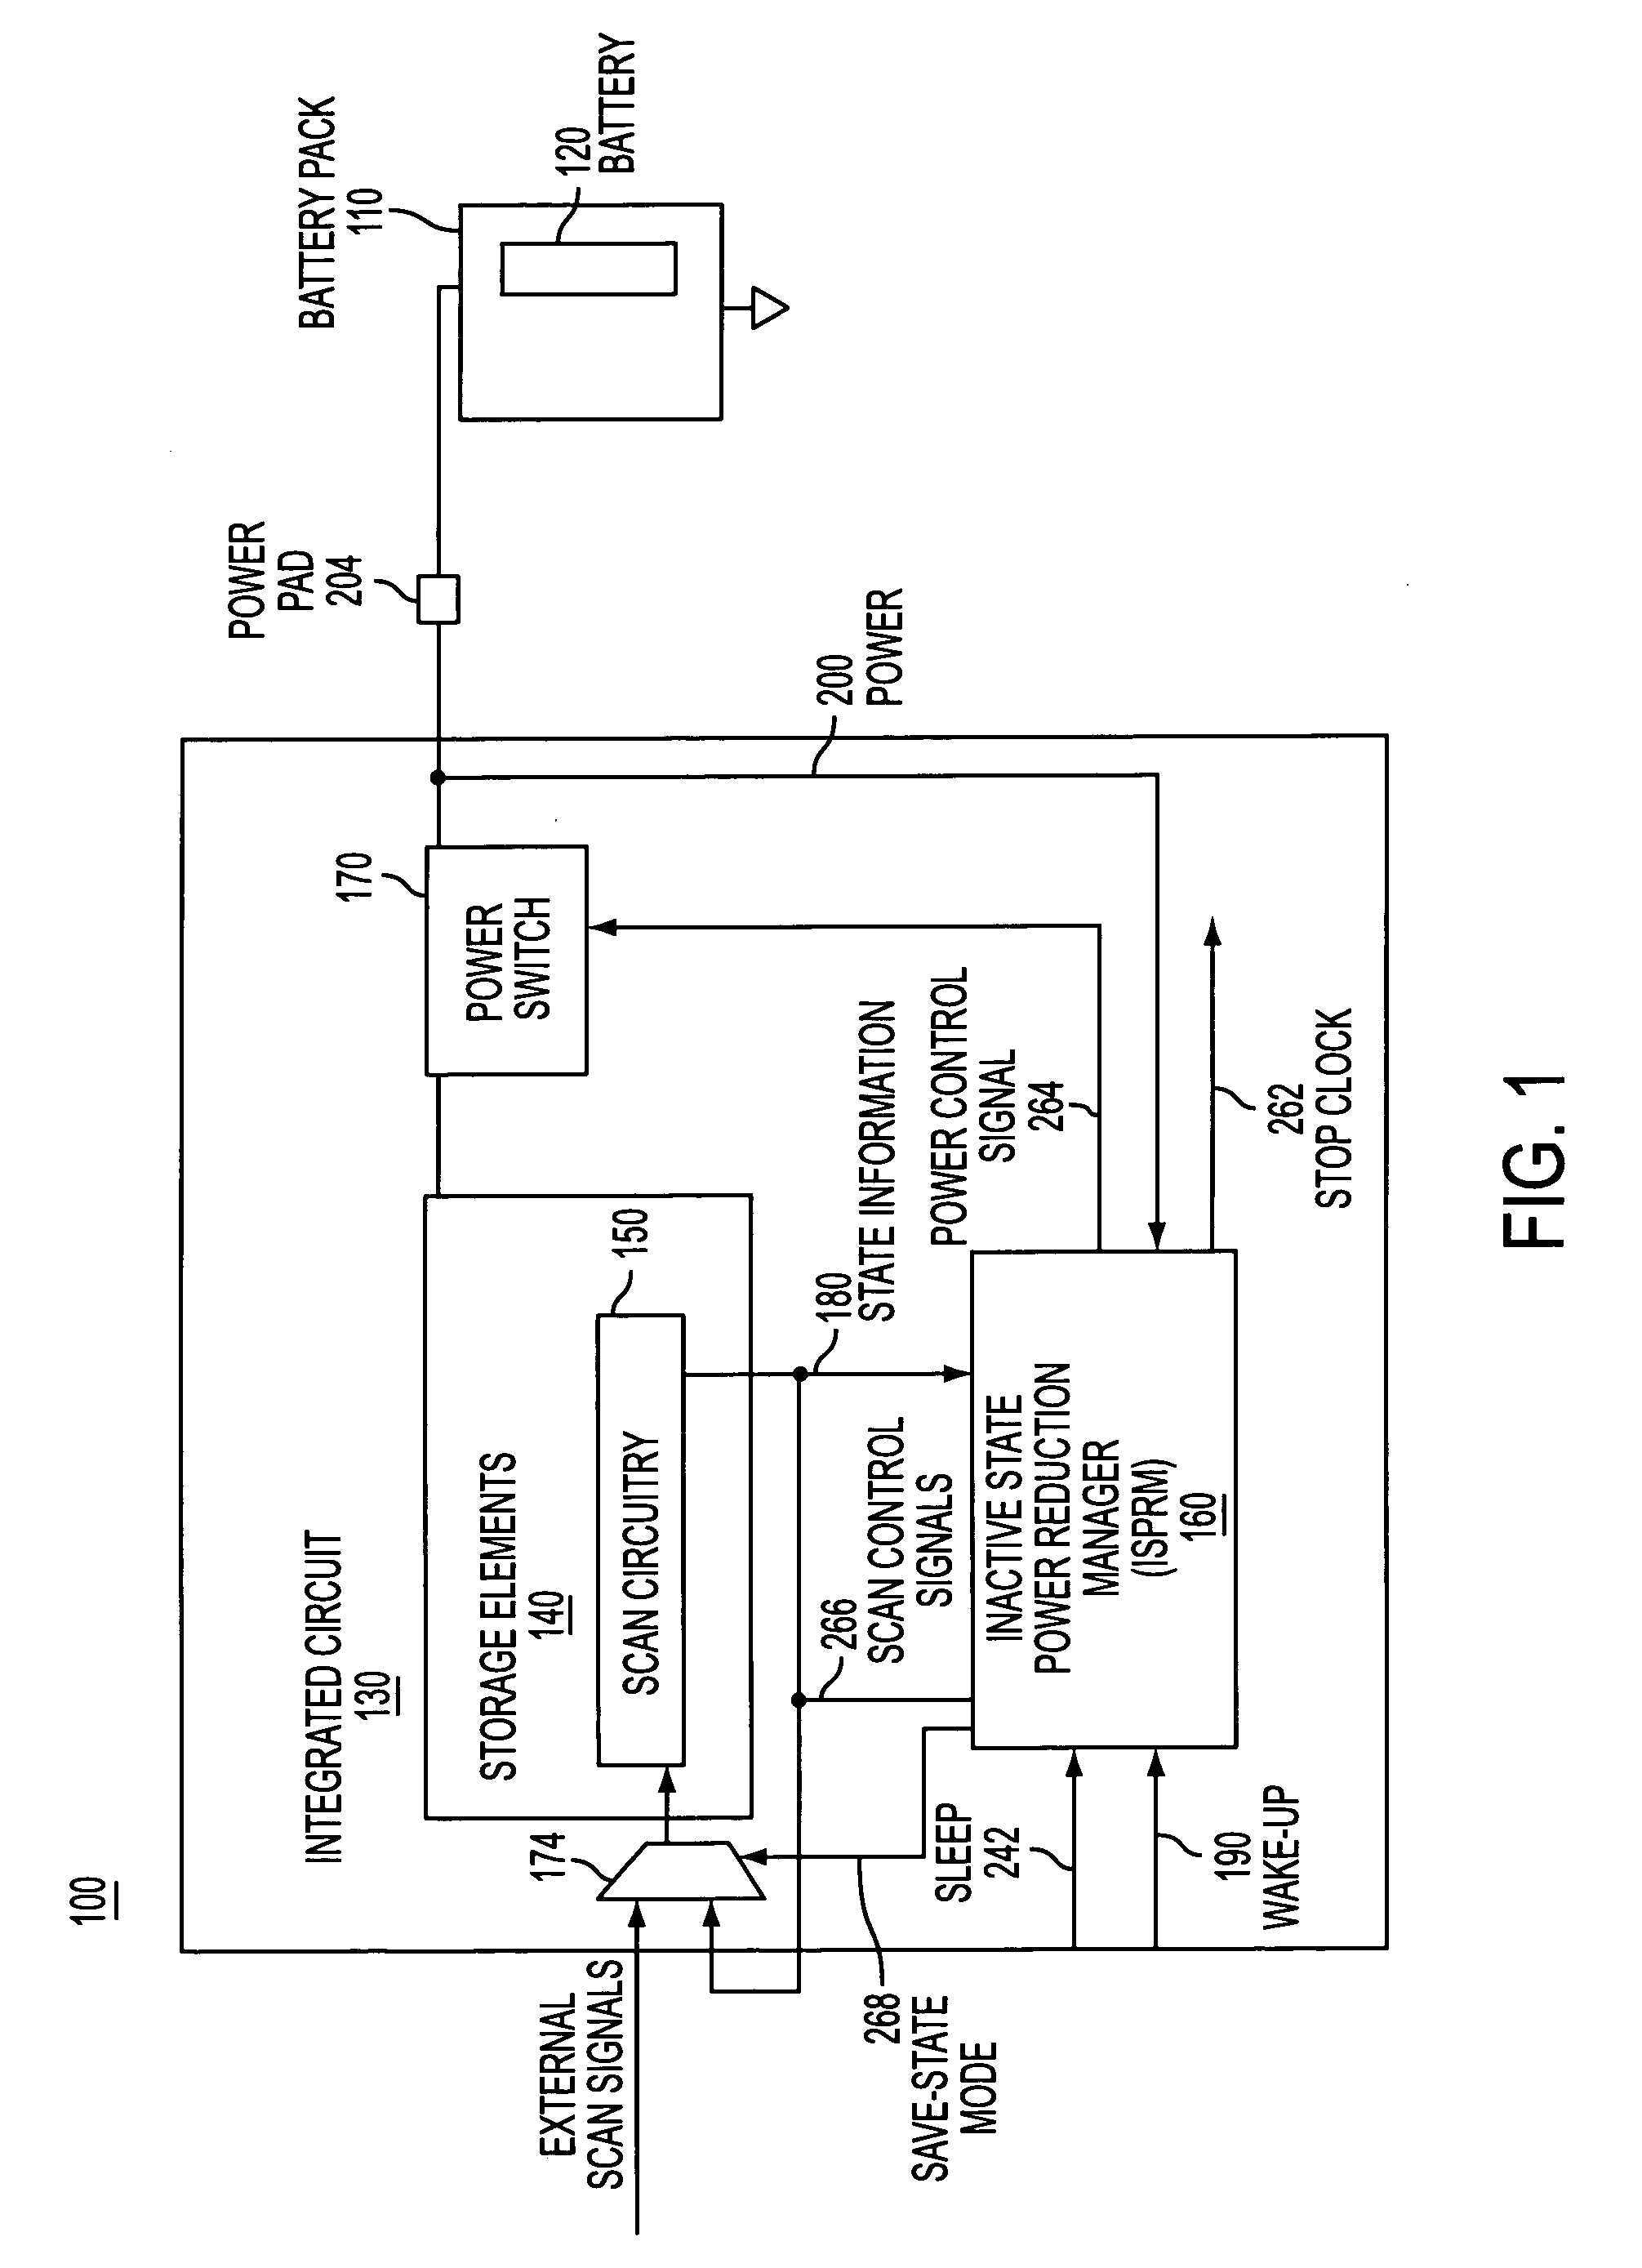 Scan-based state save and restore method and system for inactive state power reduction